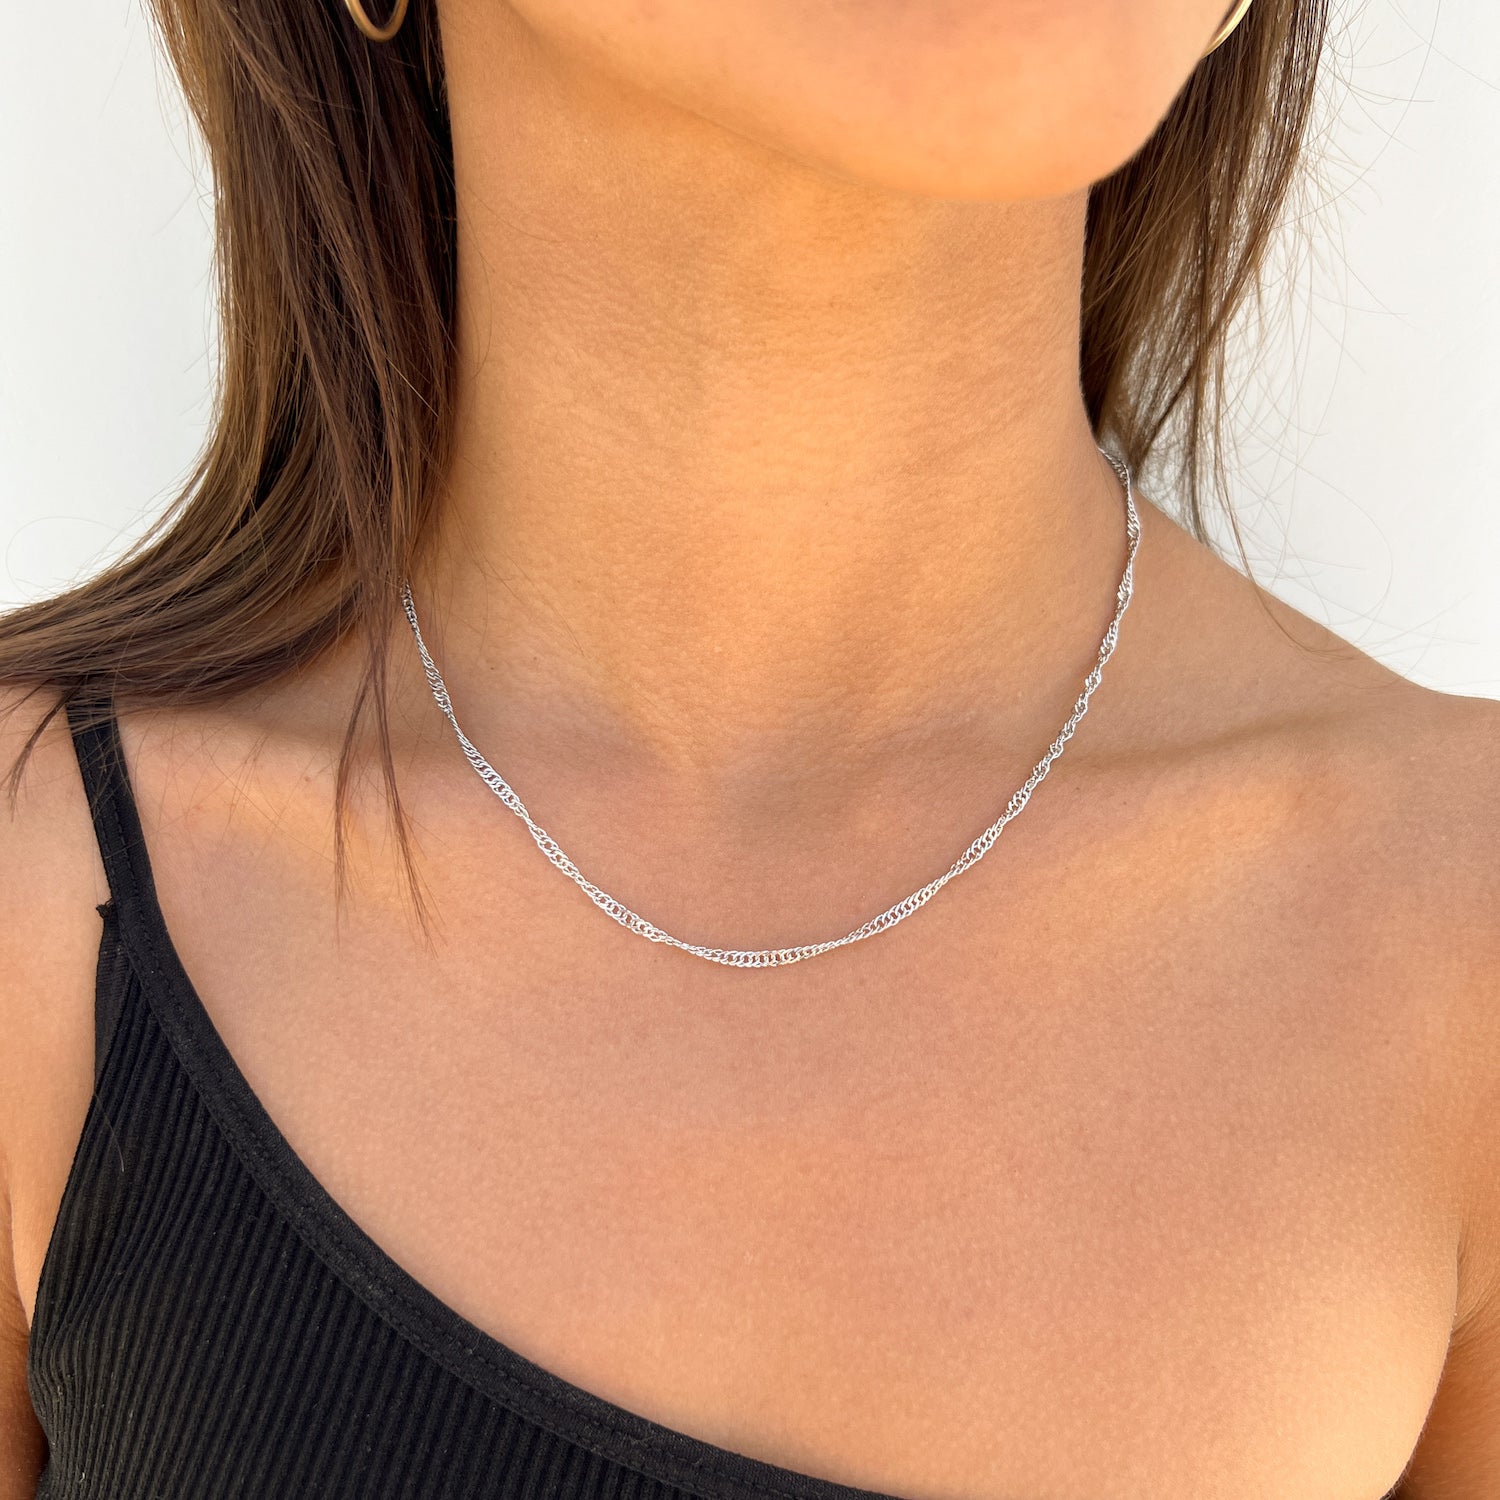 Dainty Twist Chain Woman Necklace/ 14K Solid Yellow Gold Chain Necklace/  Essential Layering Chain/ Gold Twist Chains/ Christmas Gifts - Etsy